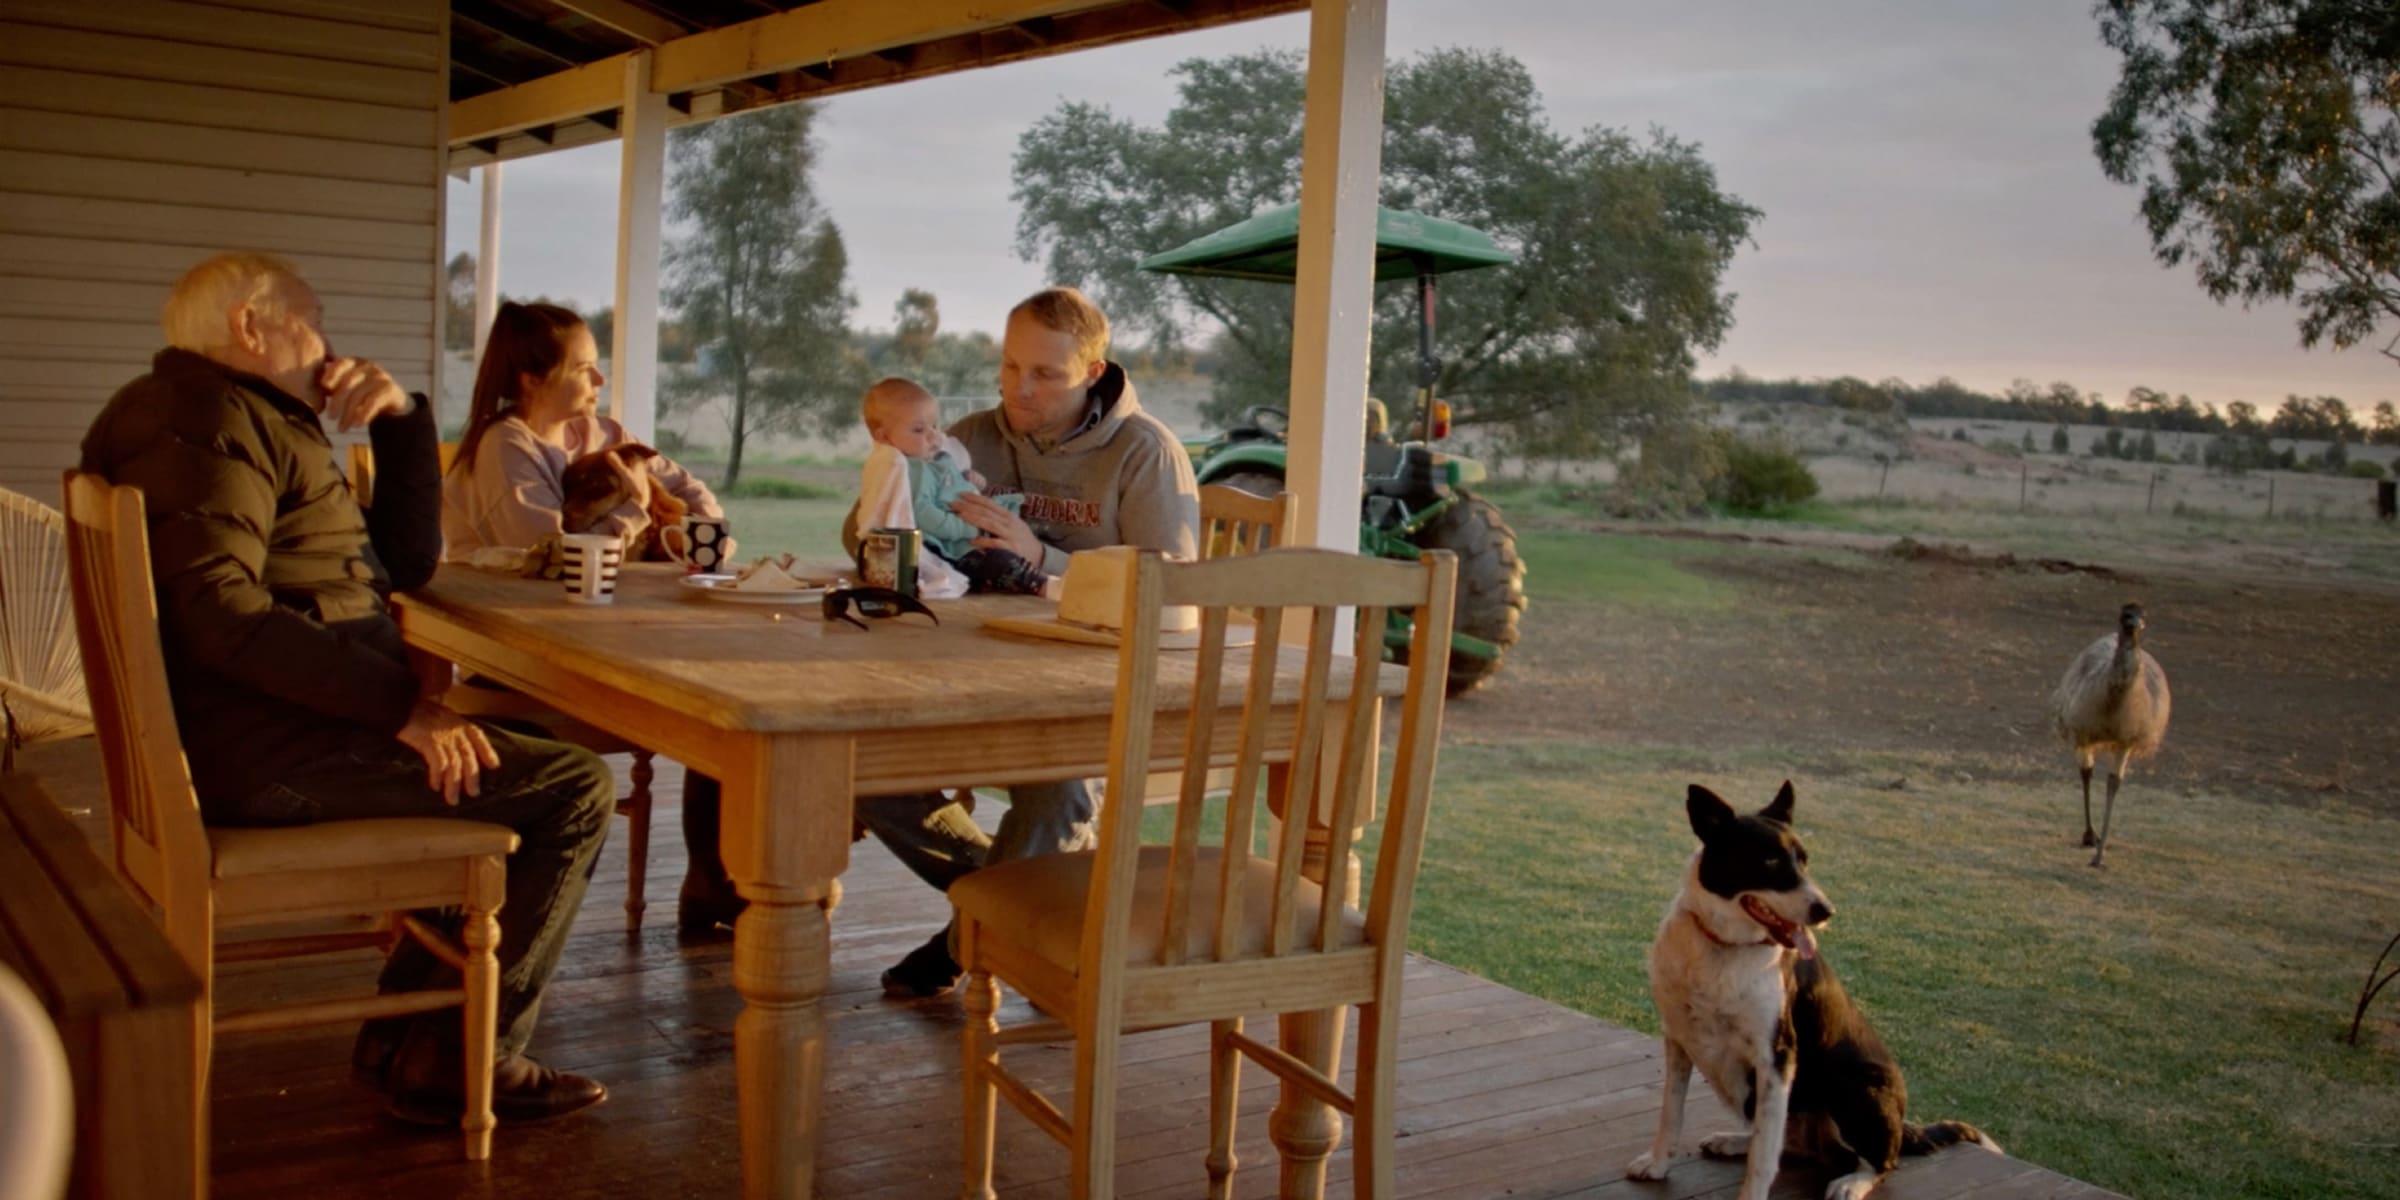 Will, Emma and their family sitting outside on their outdoor entertaining area.